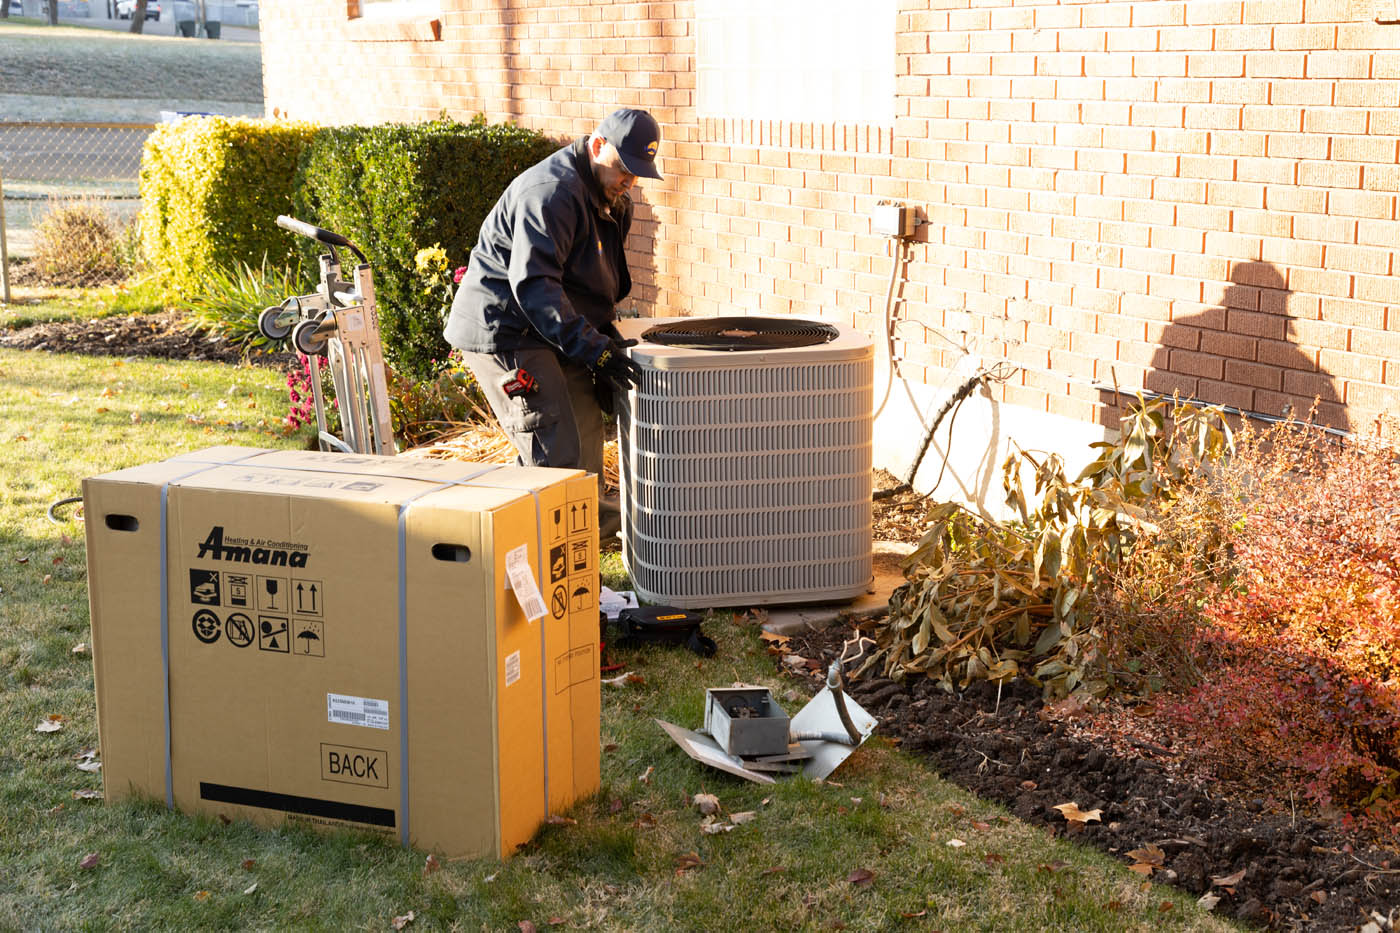 A Absolute Comfort Heating and Air Conditioning employee outside a home working on an hvac system.